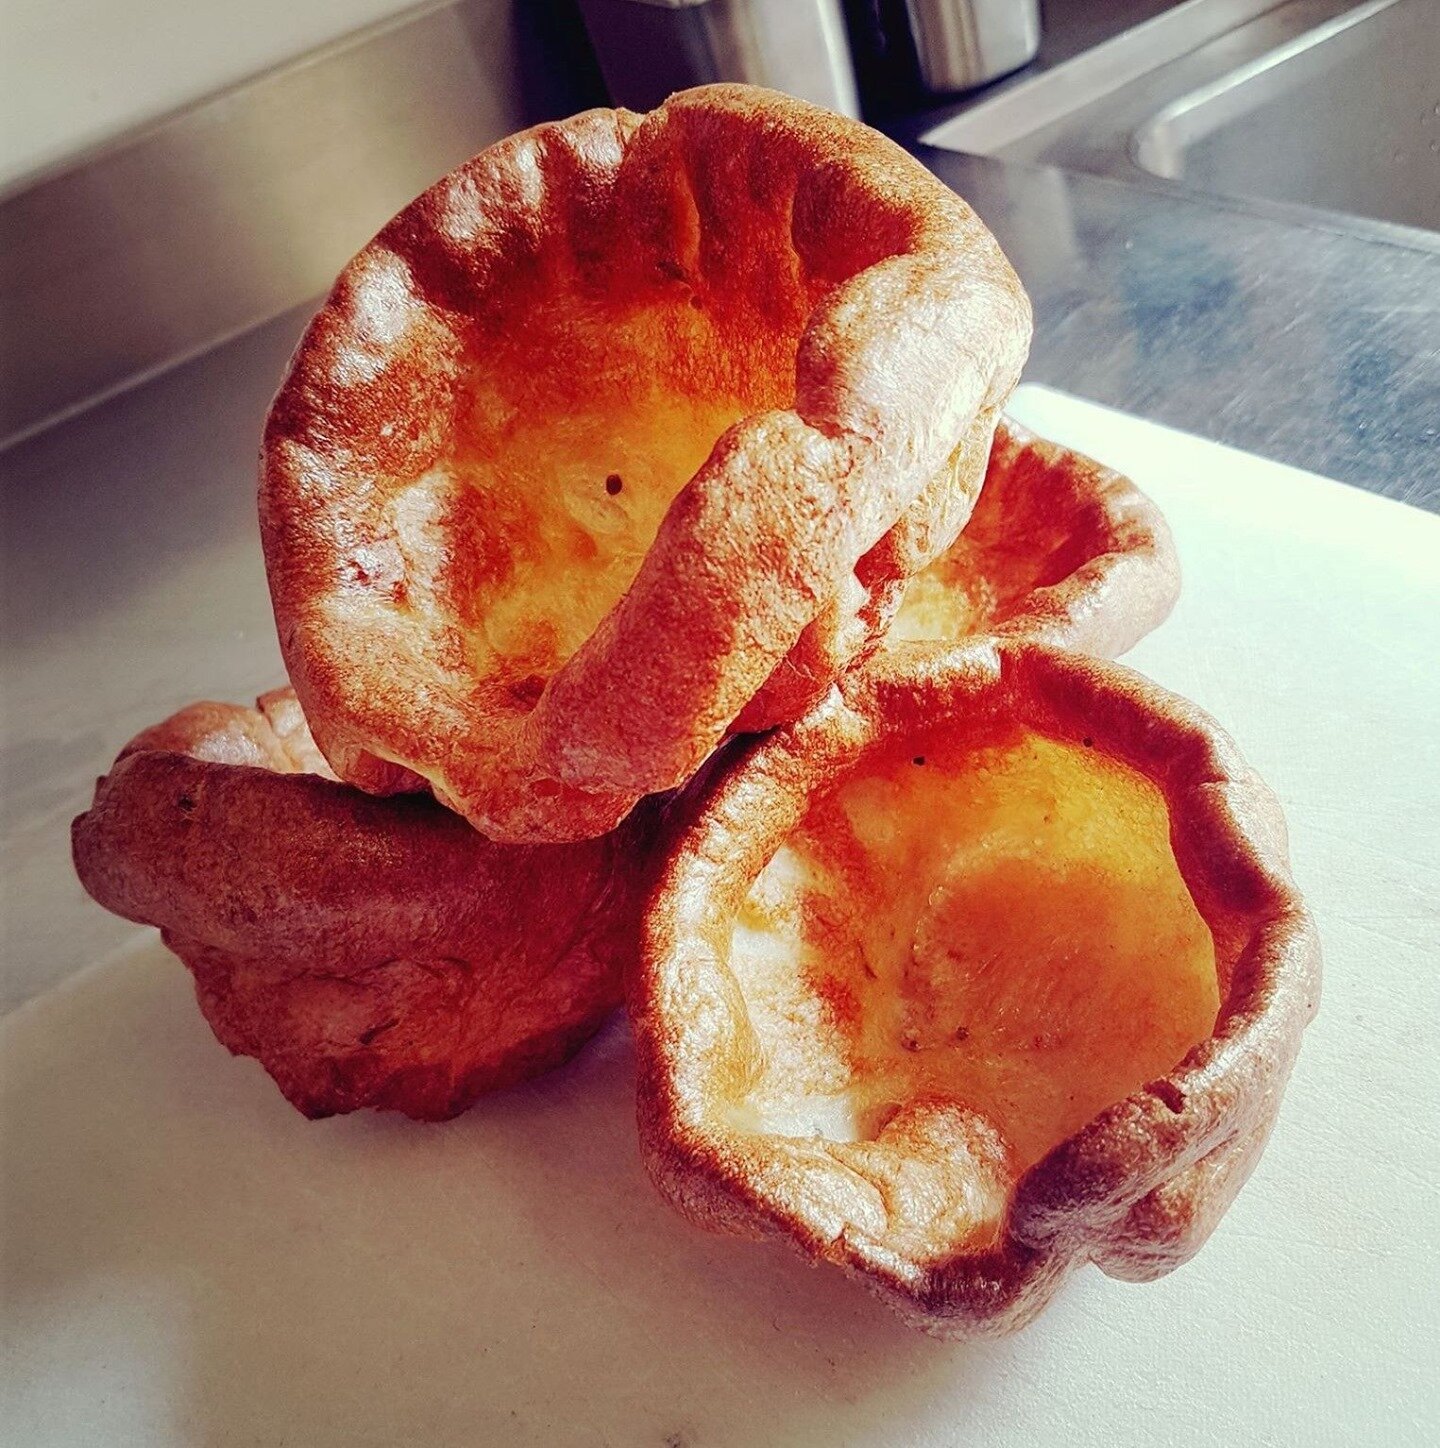 Who's ready for our bigger-than-your-head yorkshire puddings today? Tag who you're bringing with you! #yorkies #giantyorkshirepuddings #yummy #sundayfunday